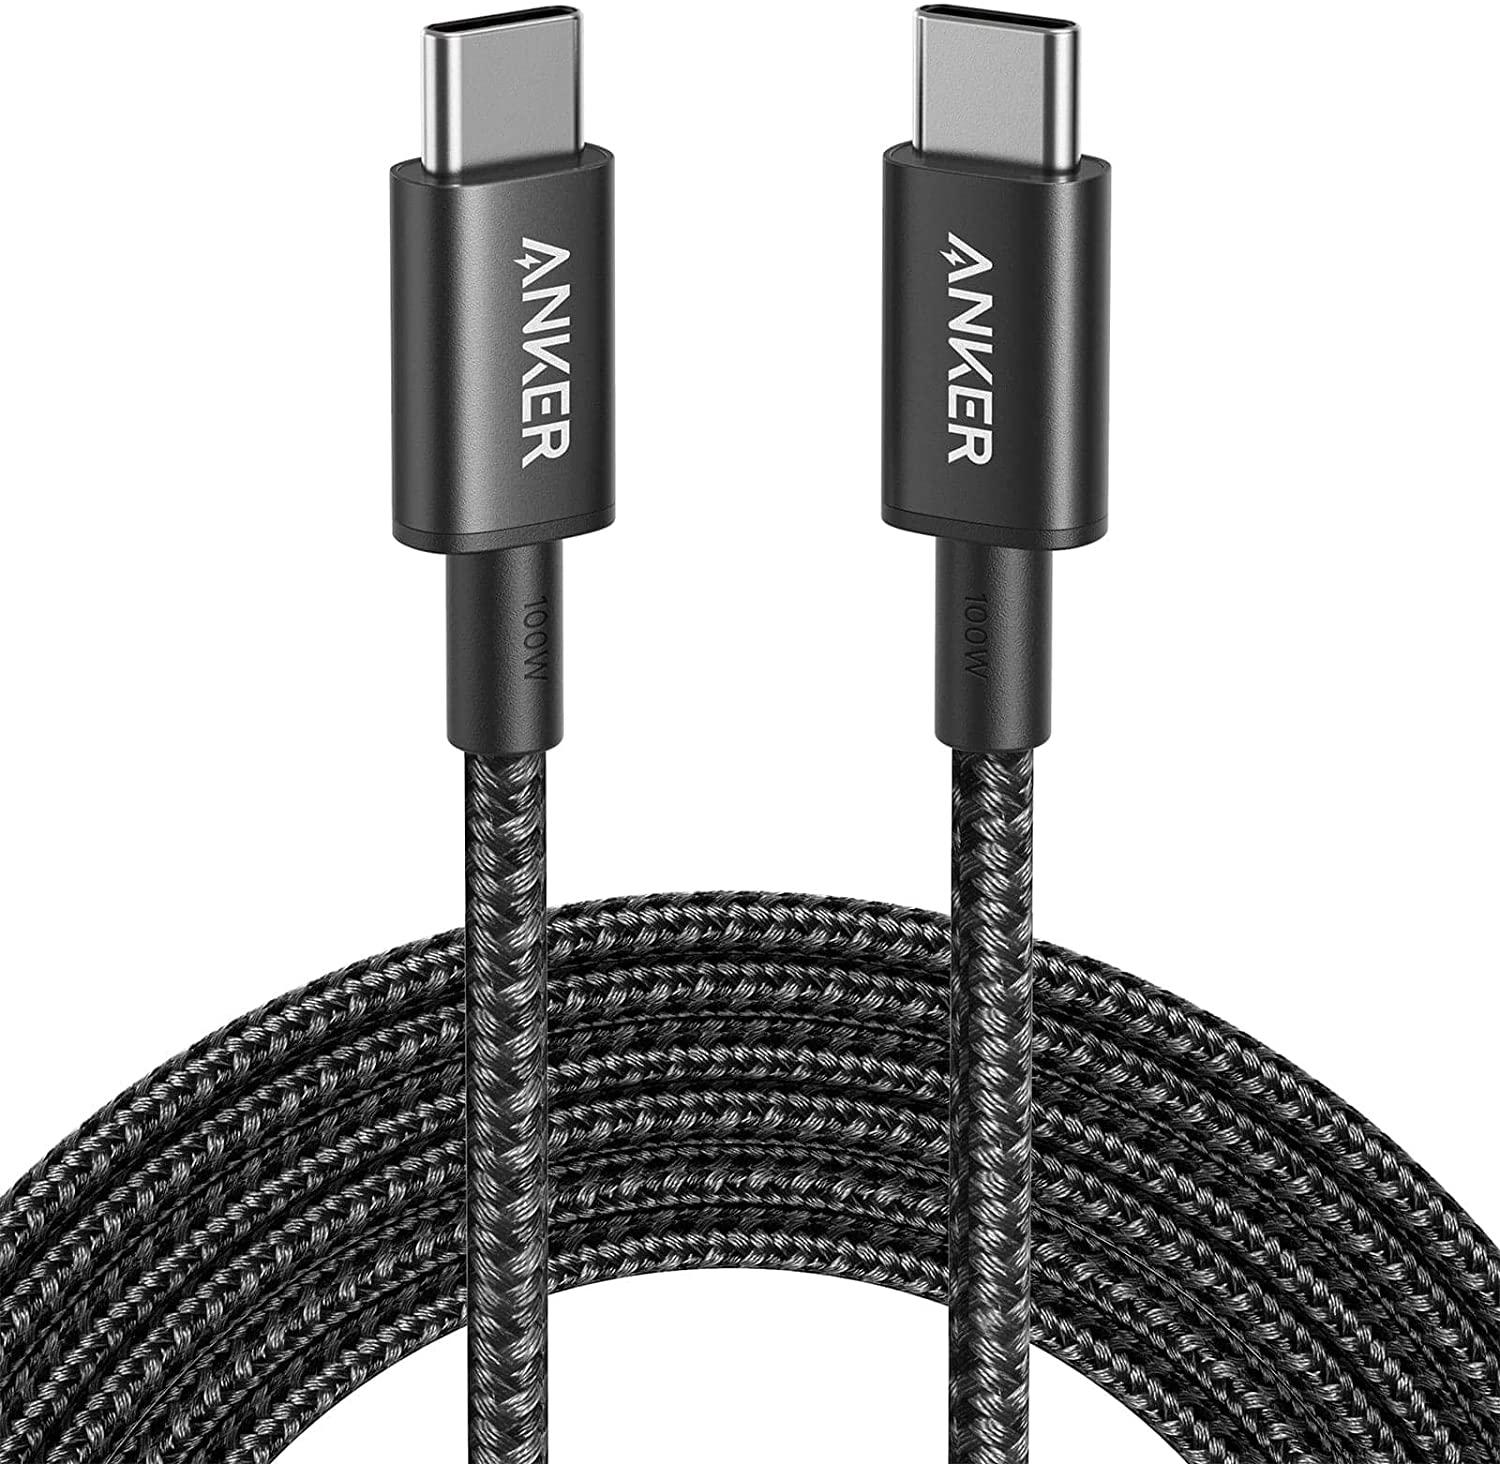 10ft Anker Nylon USB-C to USB-C Cable for $9.99